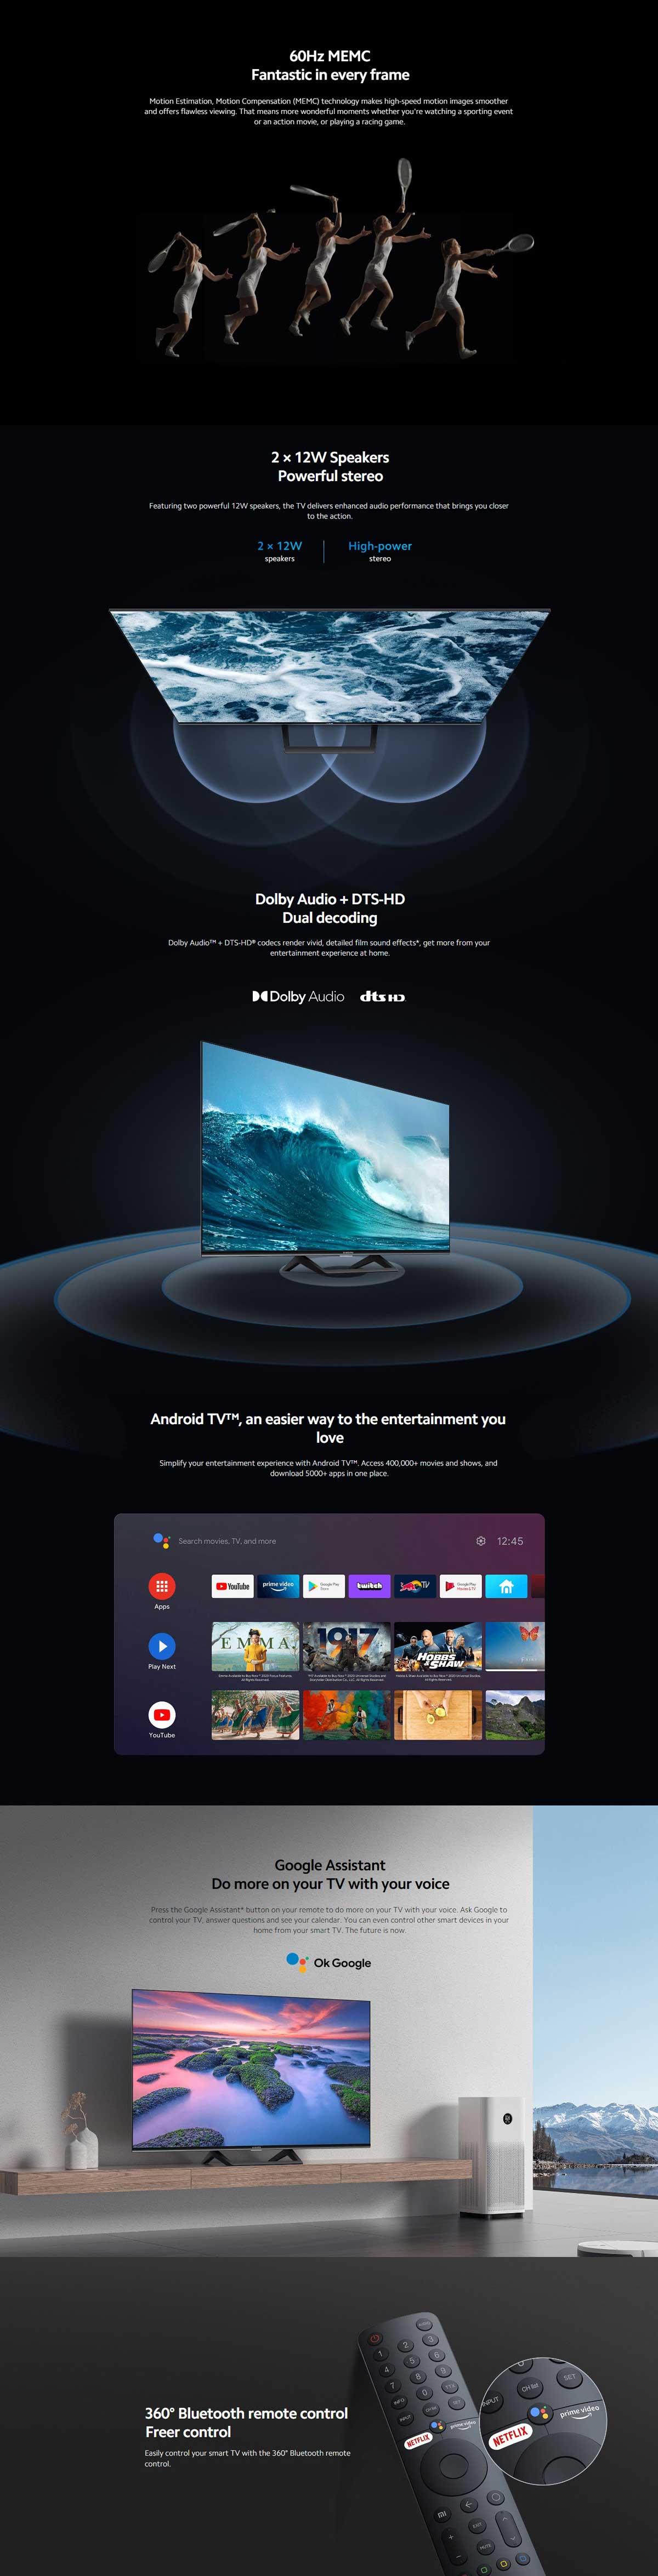 Xiaomi A2 43 Inch 4K UltraHD Smart Android TV Global Version 6